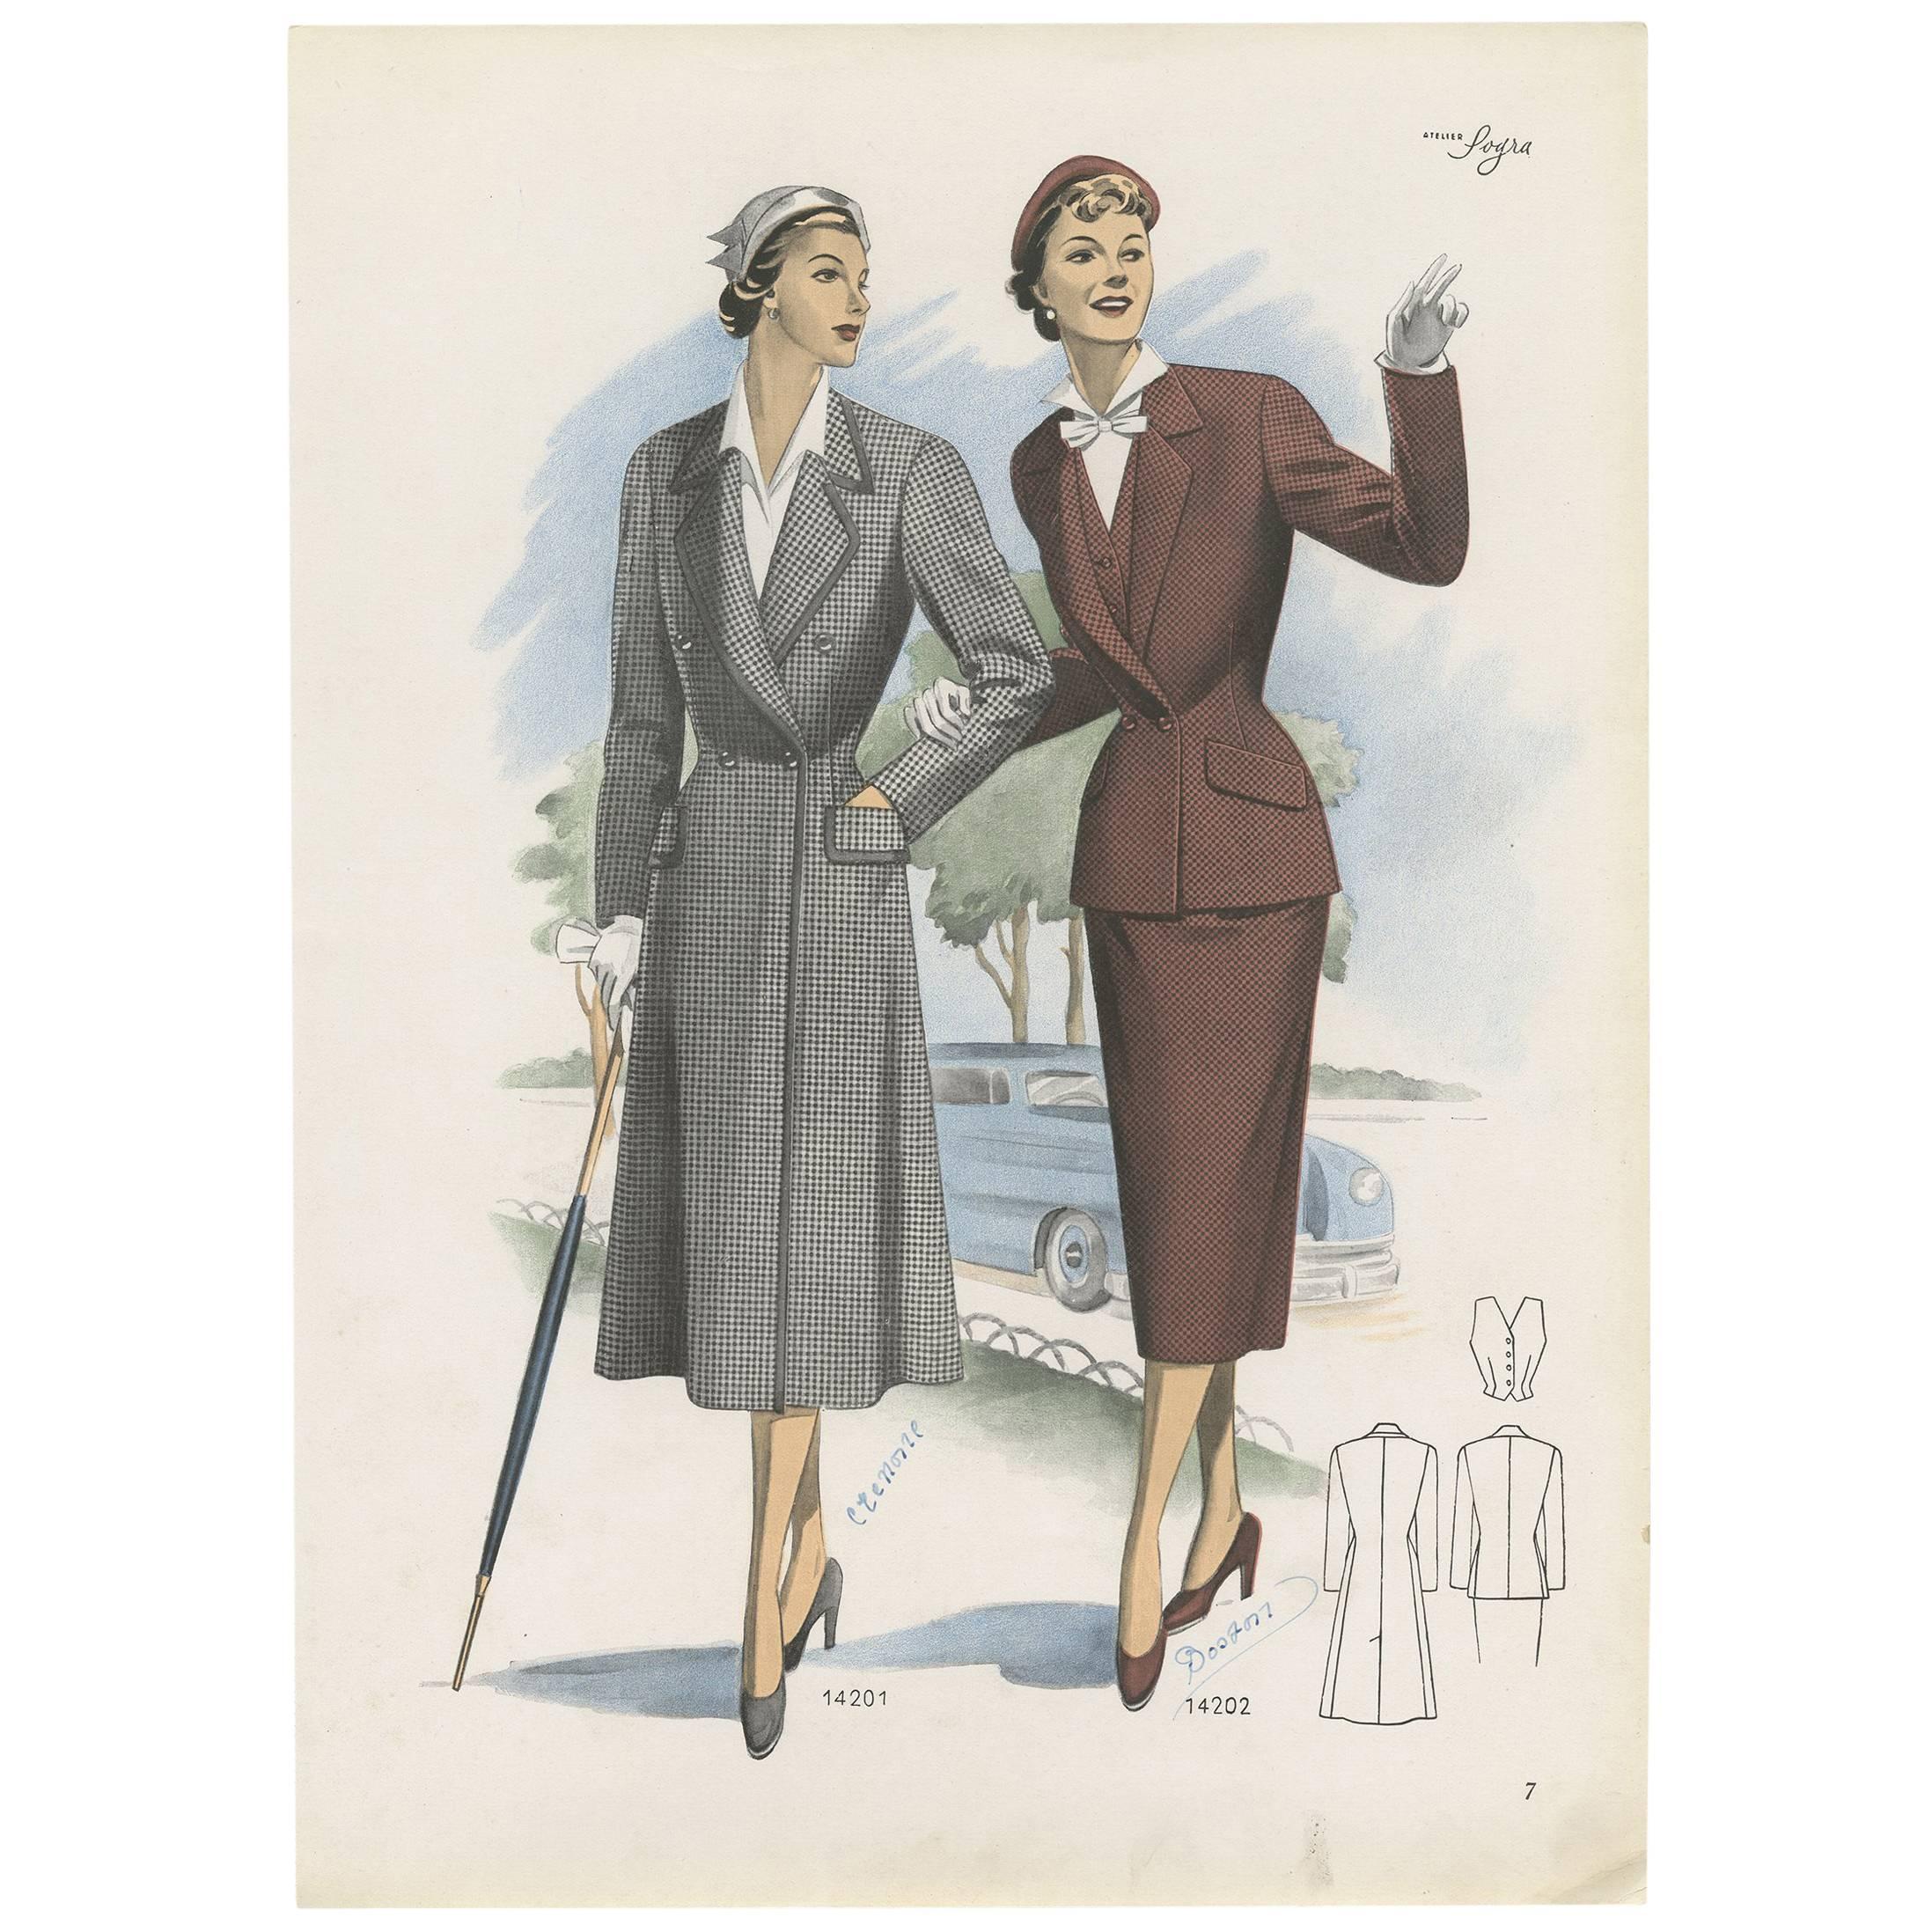 Vintage Fashion Print Published in Ladies Styles, 1951